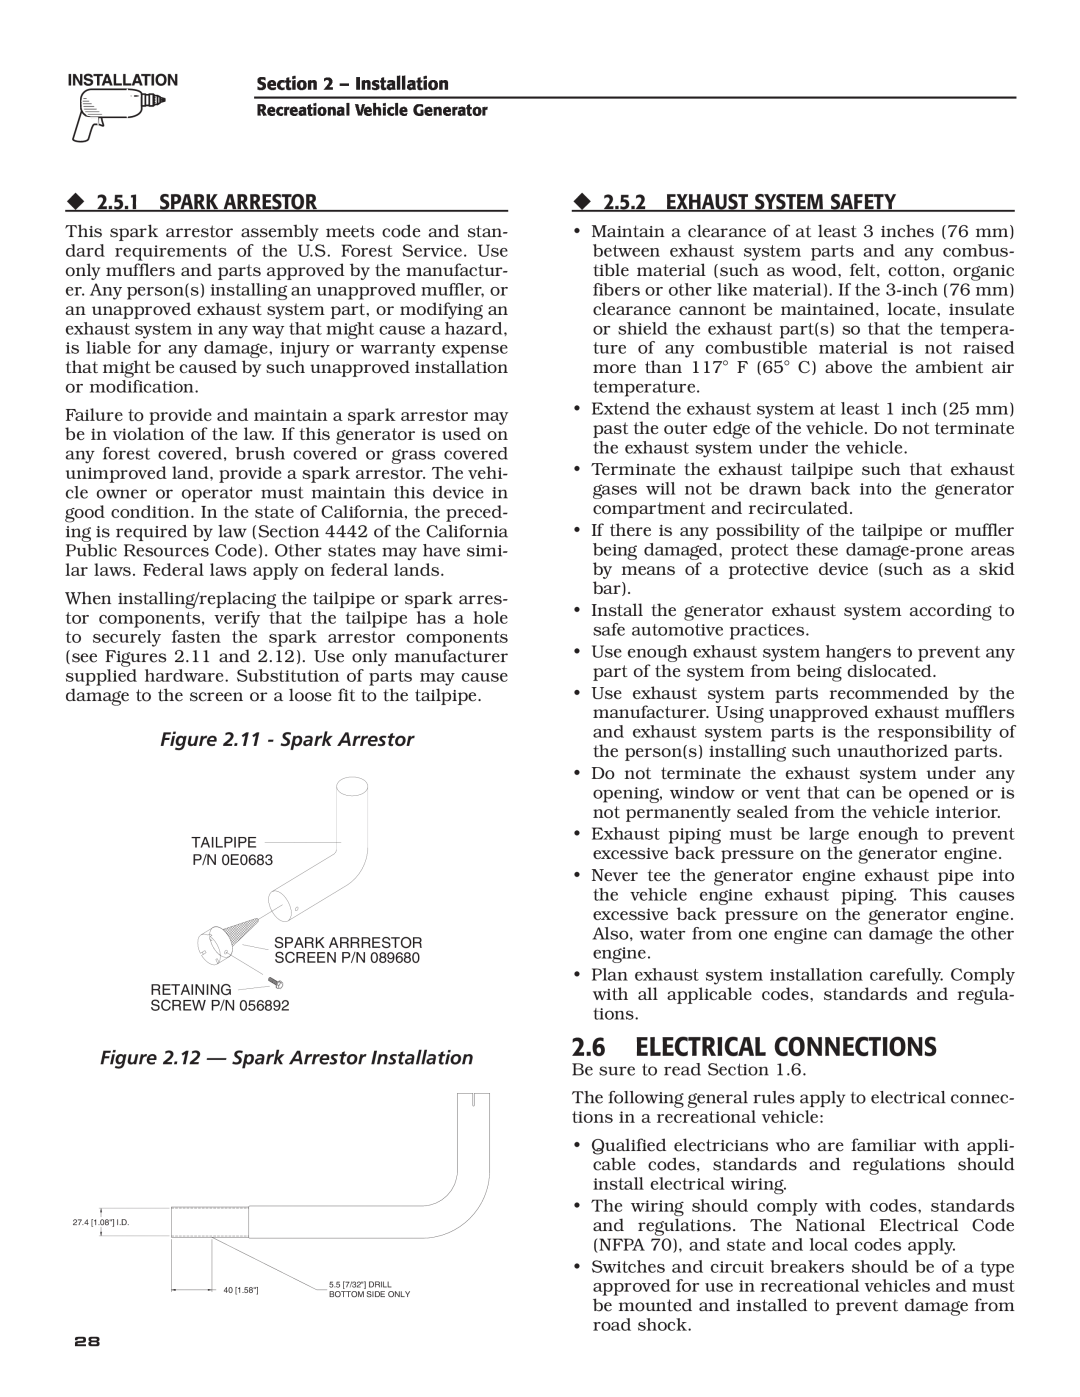 Generac Power Systems 004700-00 owner manual Electrical Connections, ‹ 2.5.1 SPARK ARRESTOR, ‹ 2.5.2 EXHAUST SYSTEM SAFETY 